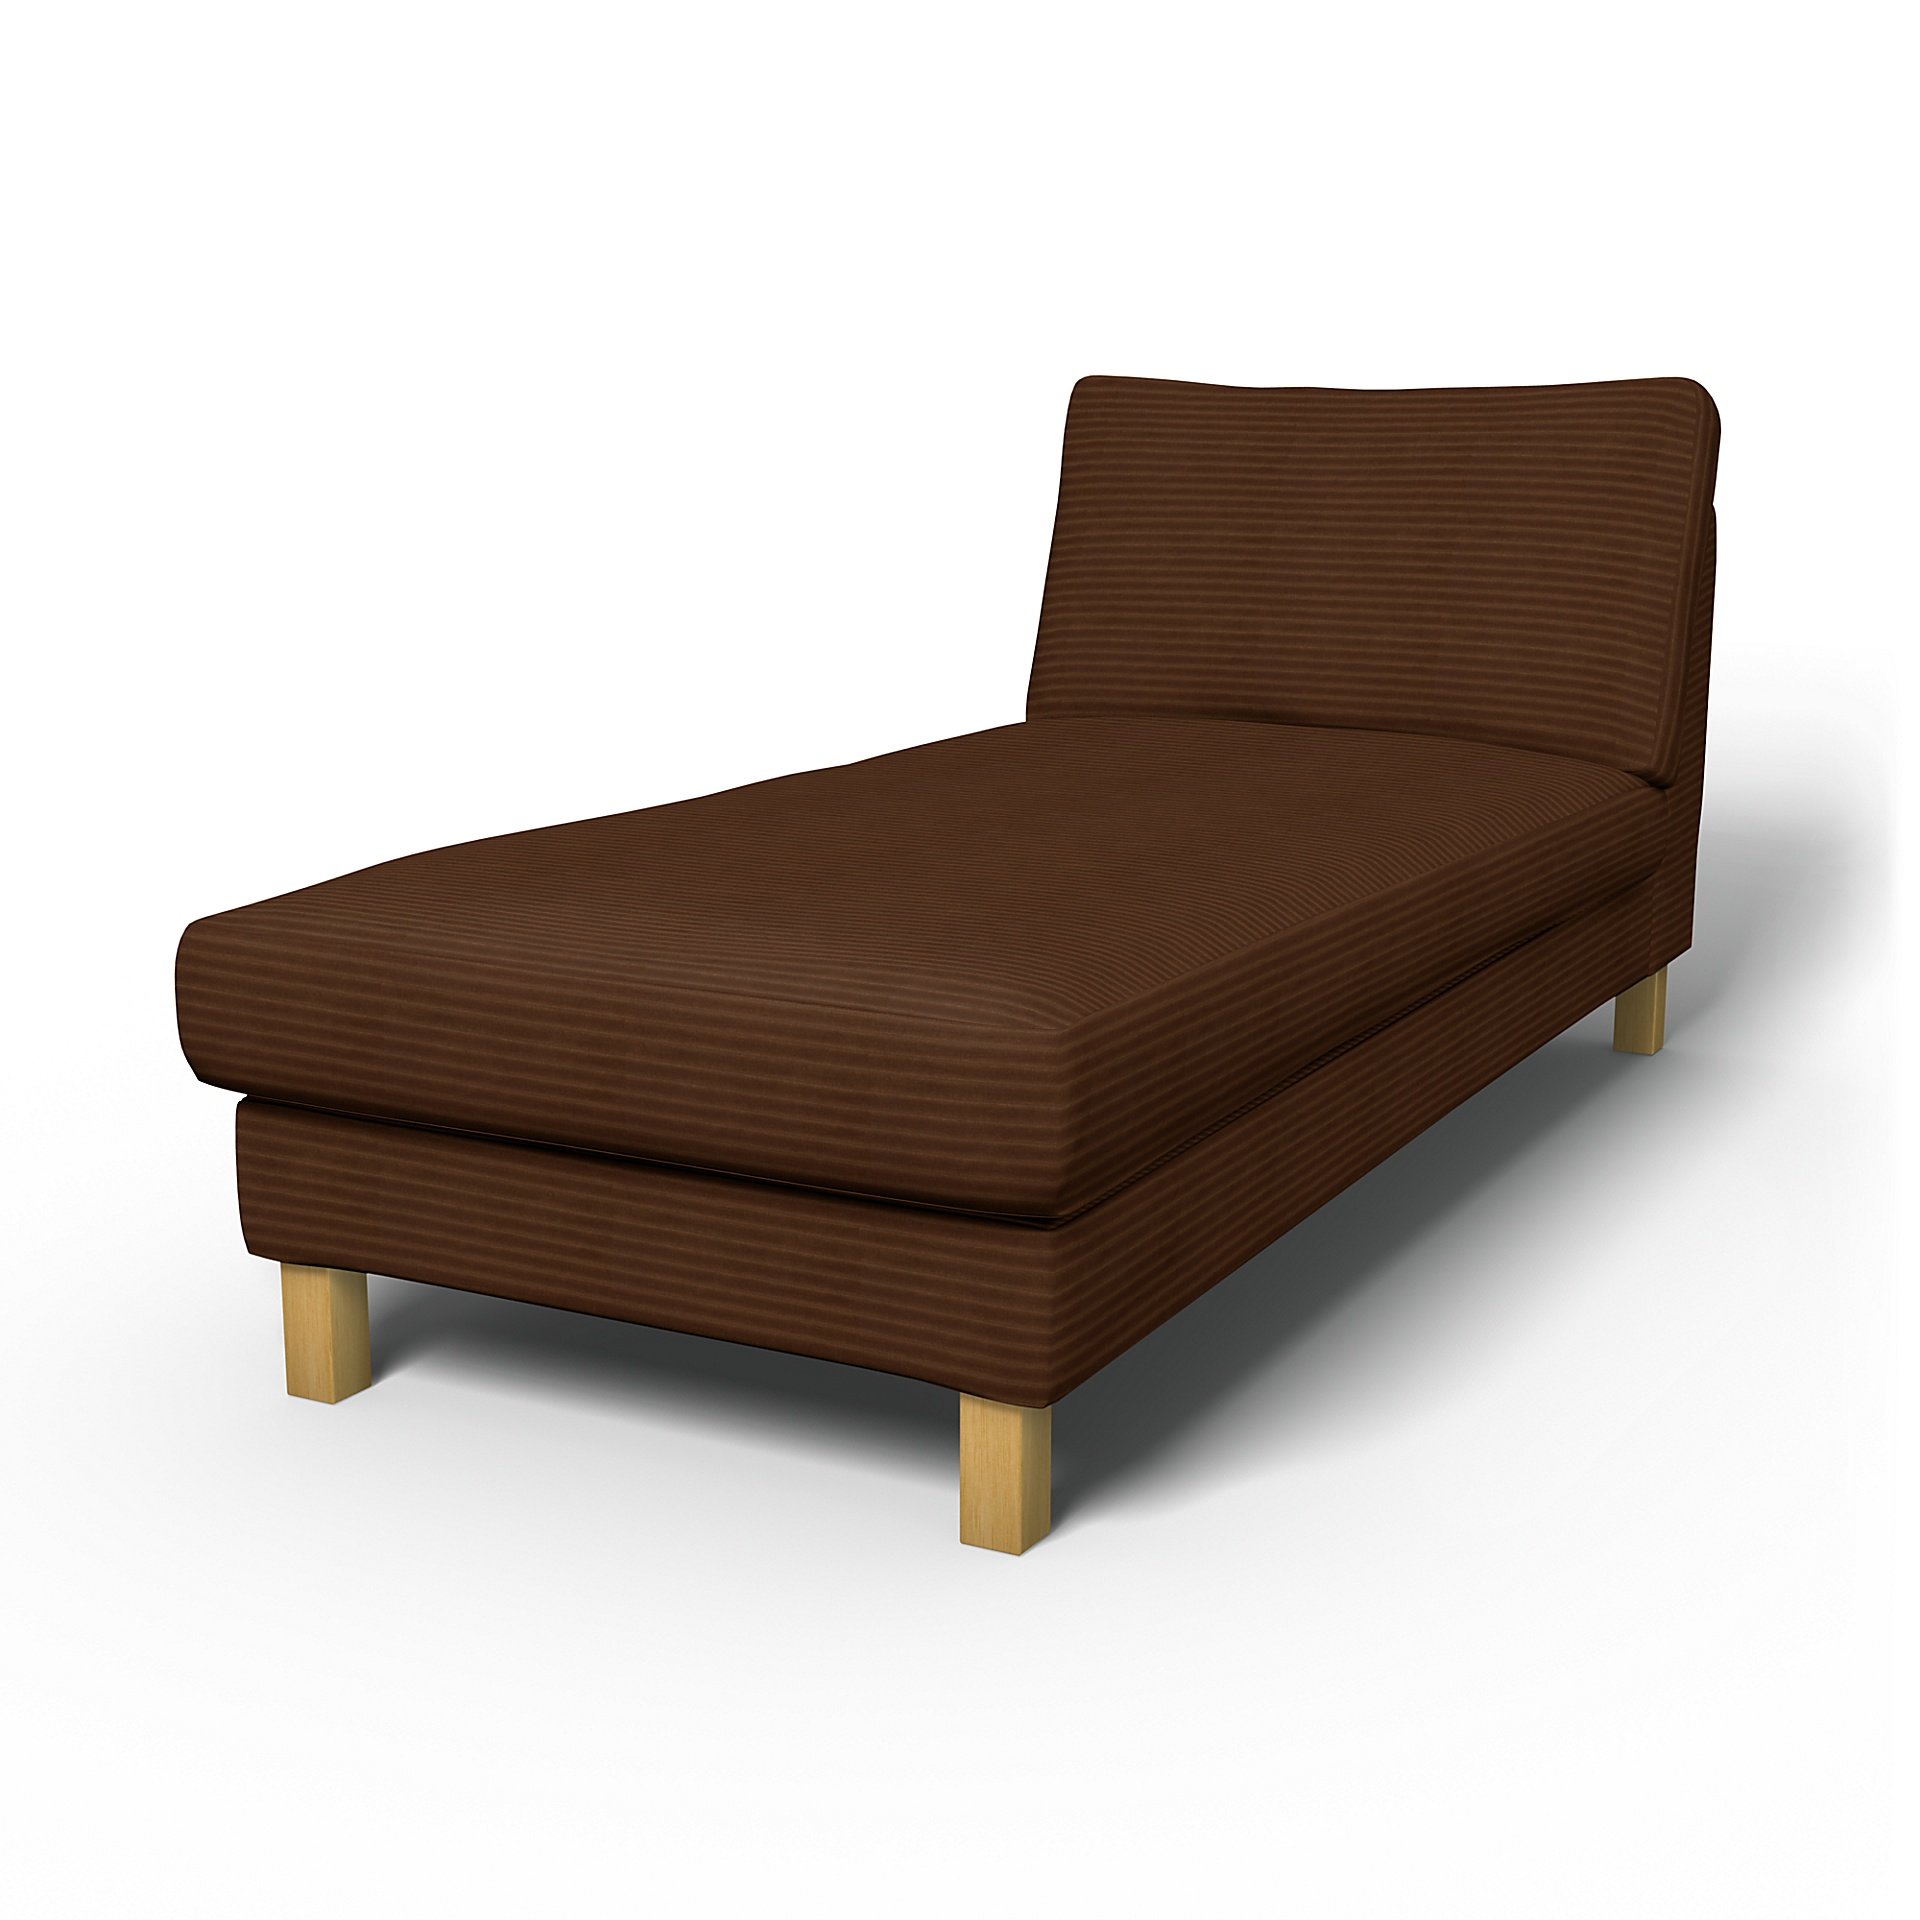 IKEA - Karlstad Stand Alone Chaise Longue Cover, Chocolate Brown, Corduroy - Bemz